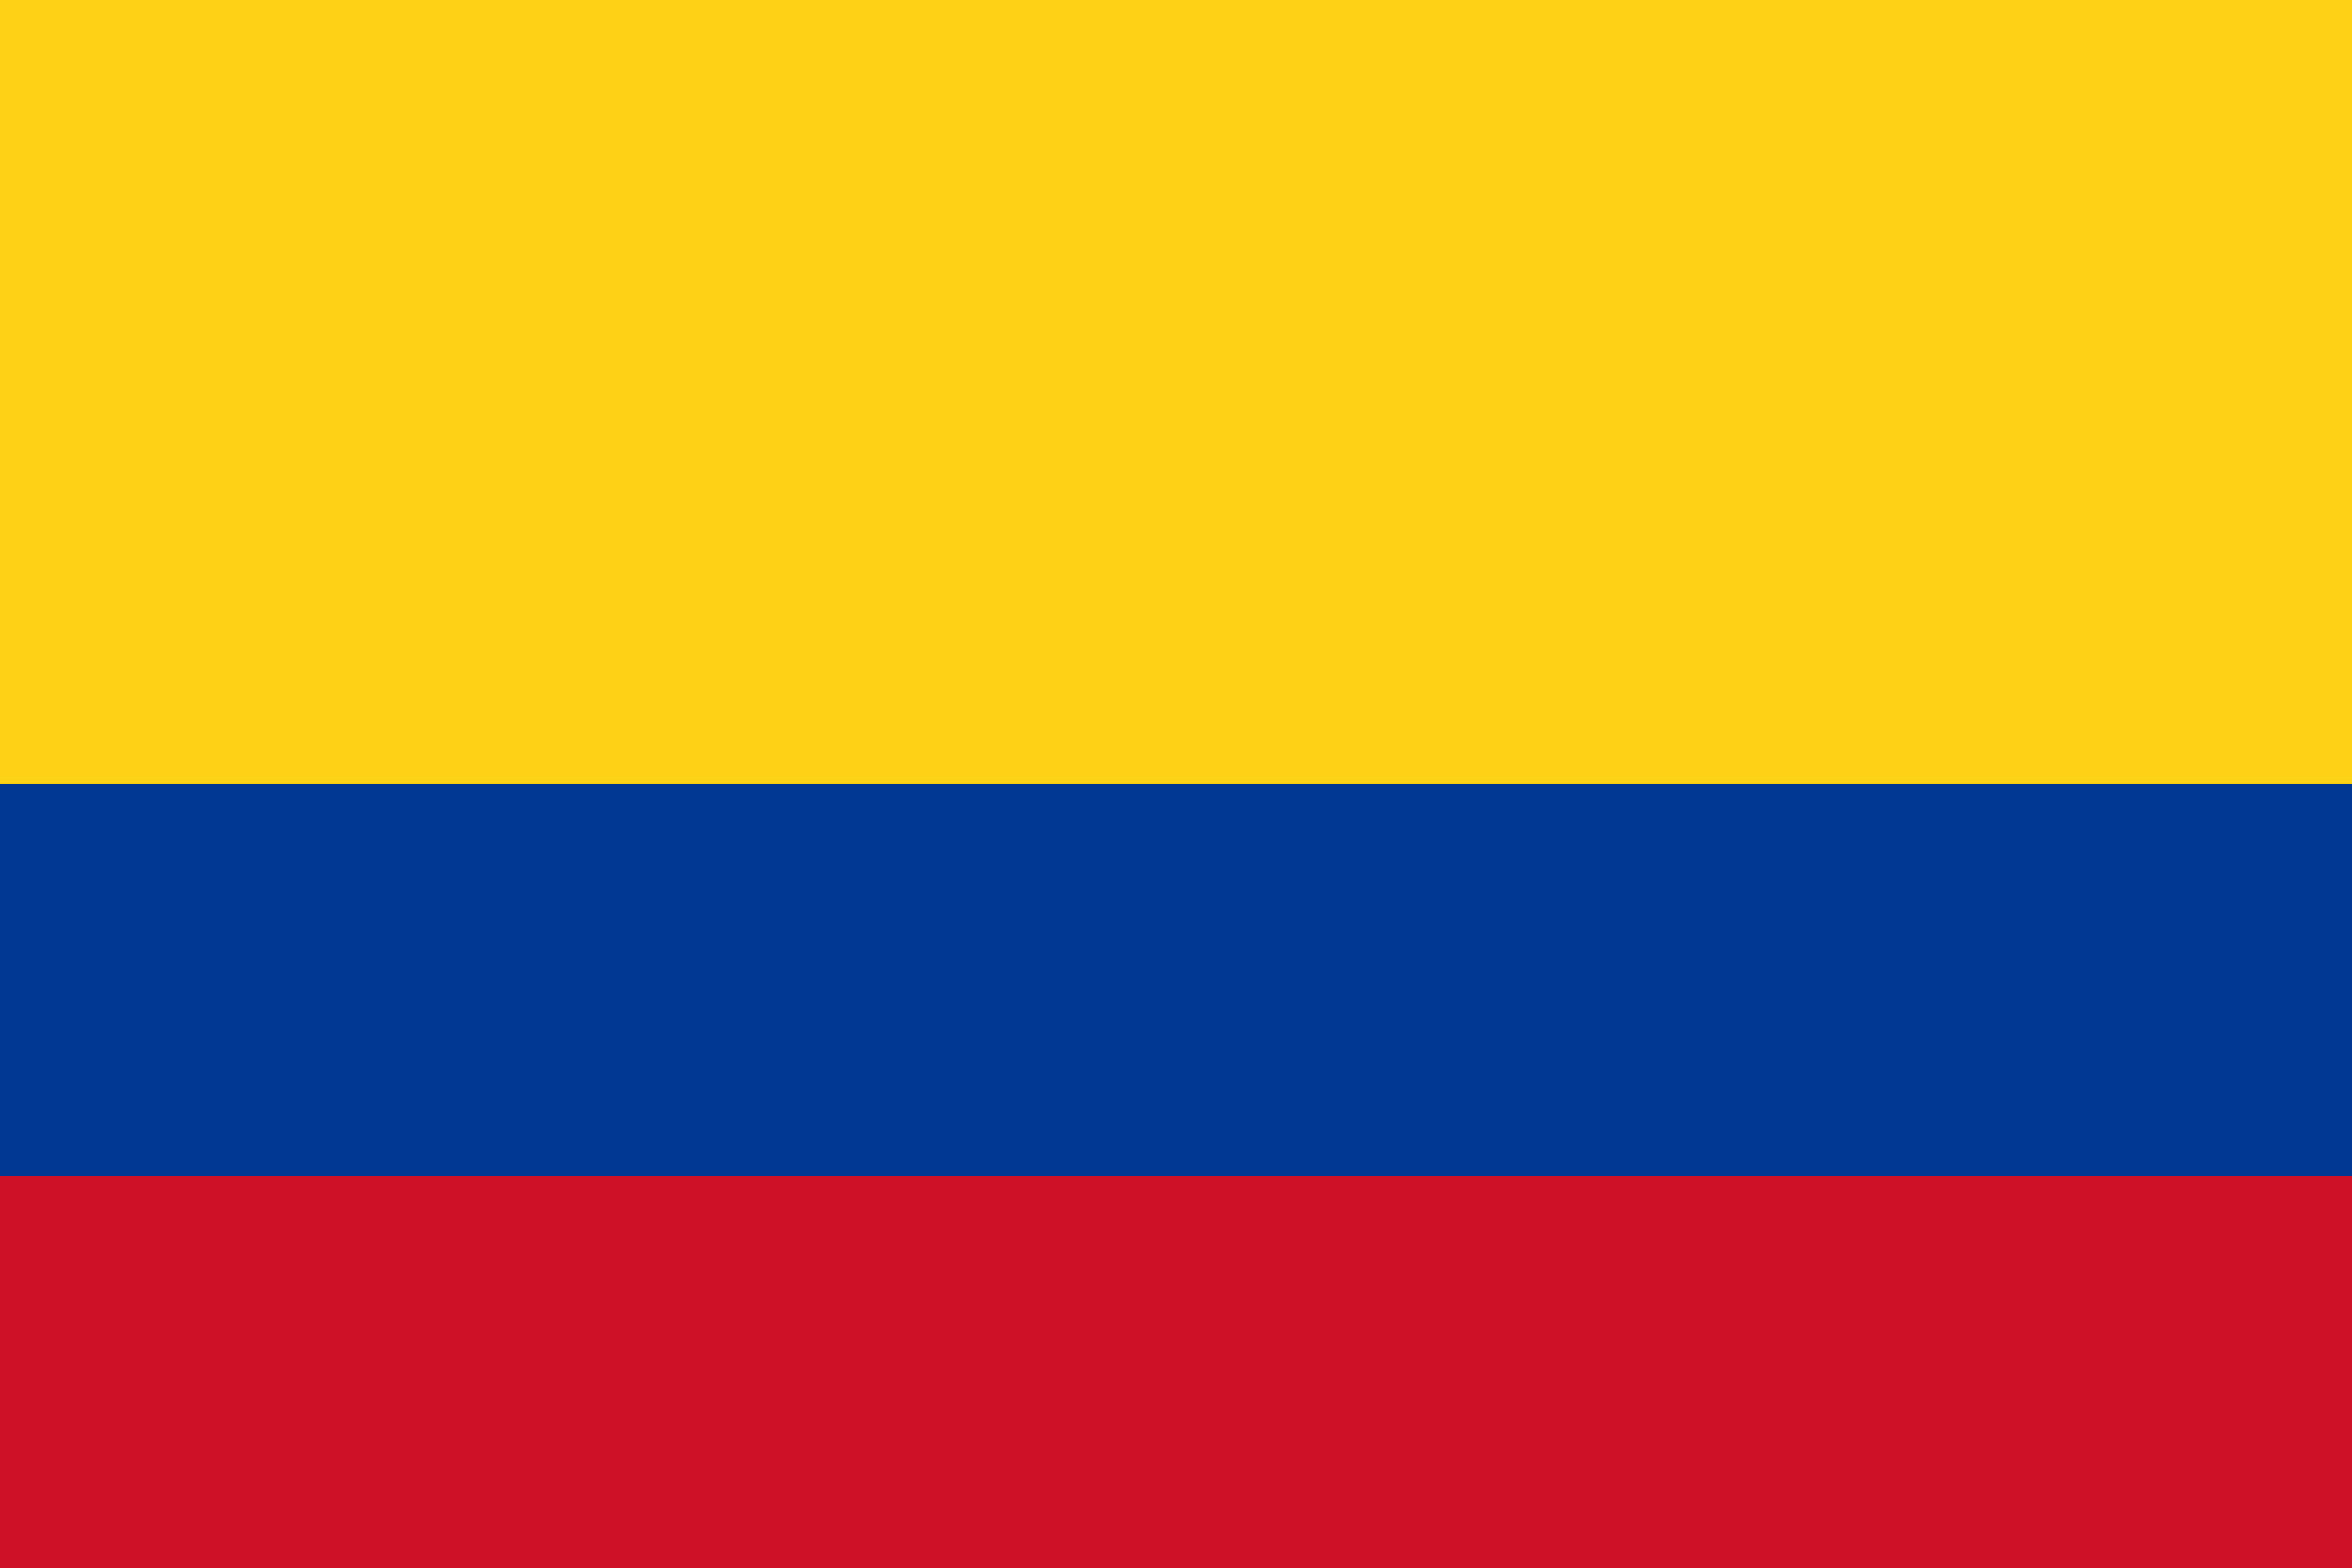 Drone Laws in Colombia